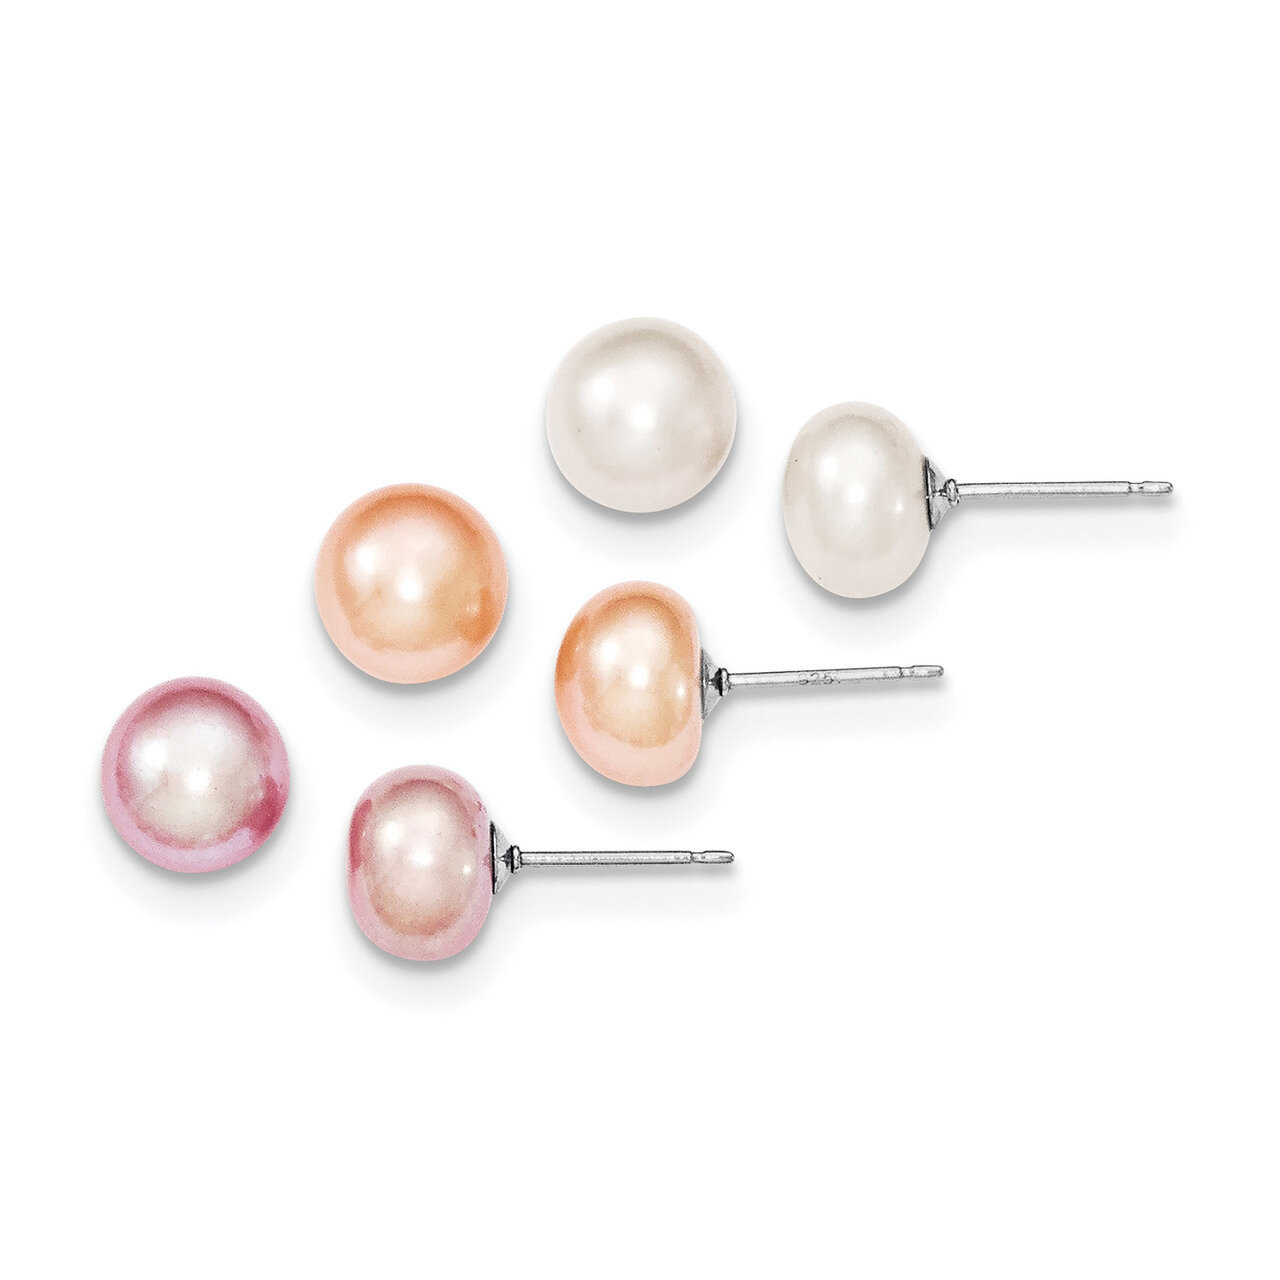 8-9mm Multi-Color Set of 3 Cultured Freshwater Pearl Button Studs Earrings Sterling Silver Rhodium QE12884SET